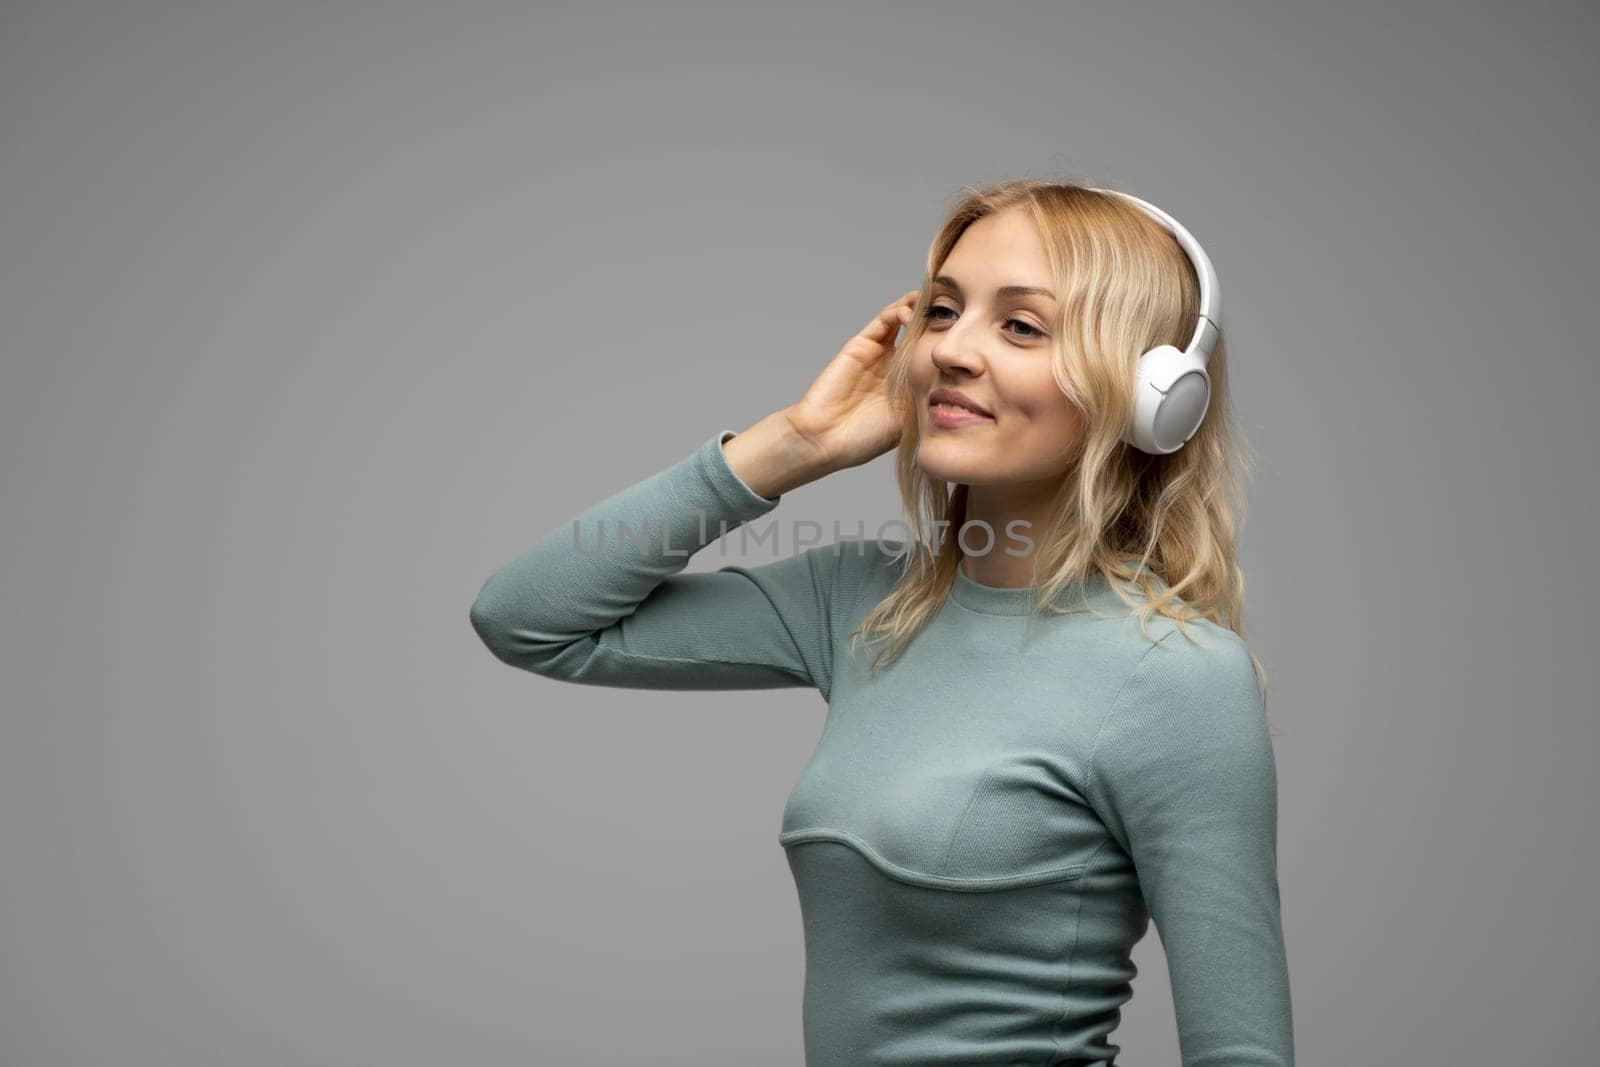 Blonde girl with white headphones listening to music on grey background in studio